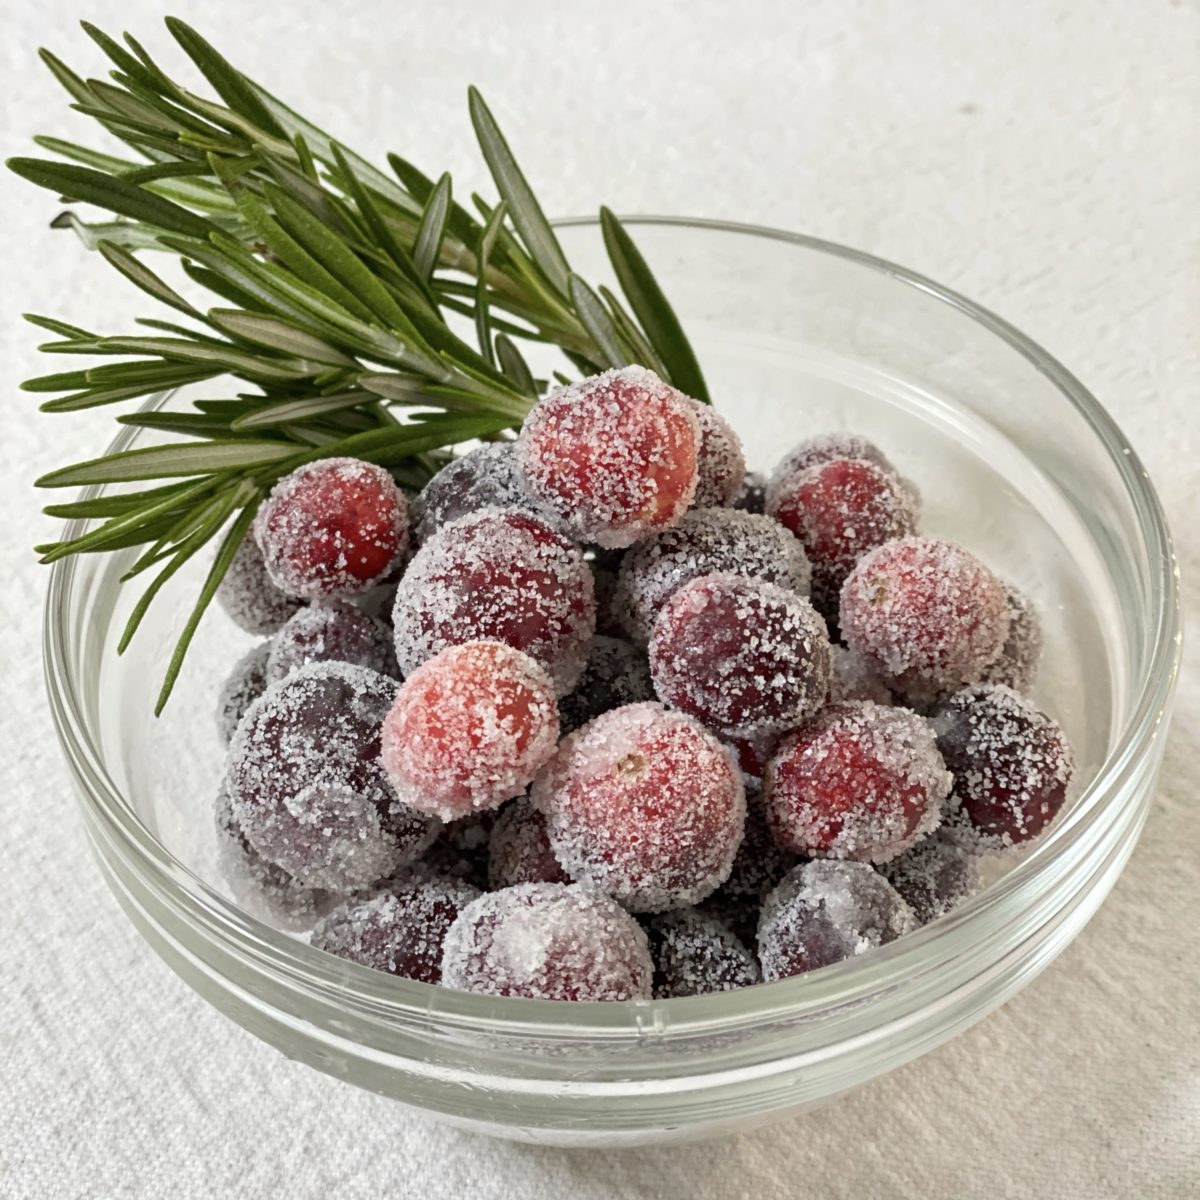 Sugared cranberries in a glass bowl with rosemary sprigs